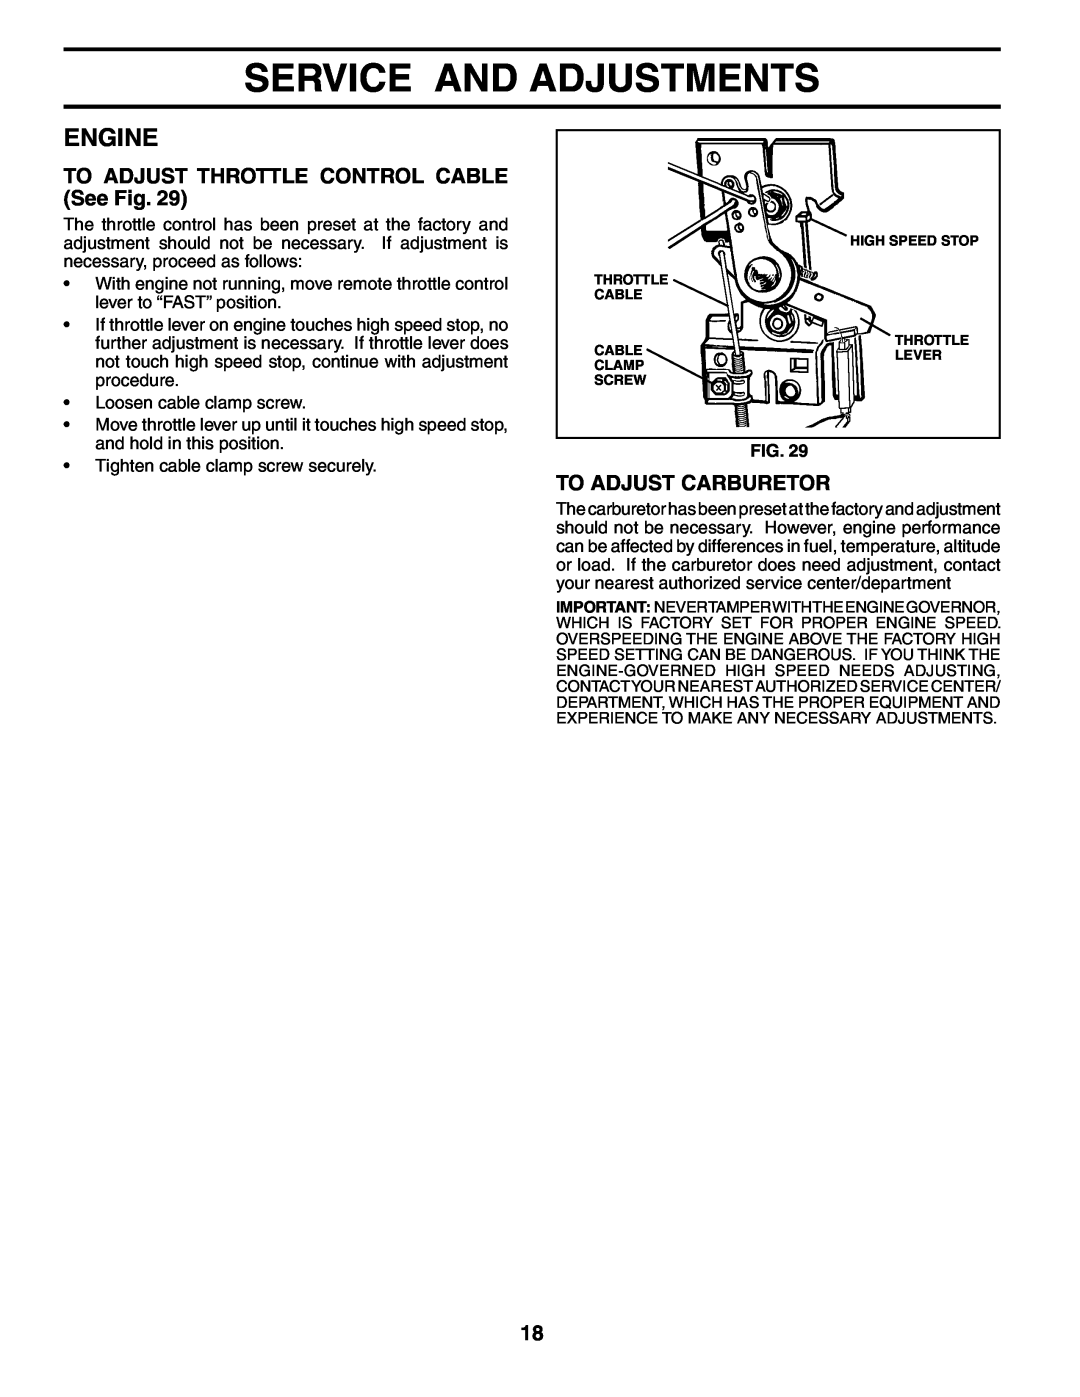 Weed Eater WET6500A TO ADJUST THROTTLE CONTROL CABLE See Fig, To Adjust Carburetor, Service And Adjustments, Engine 